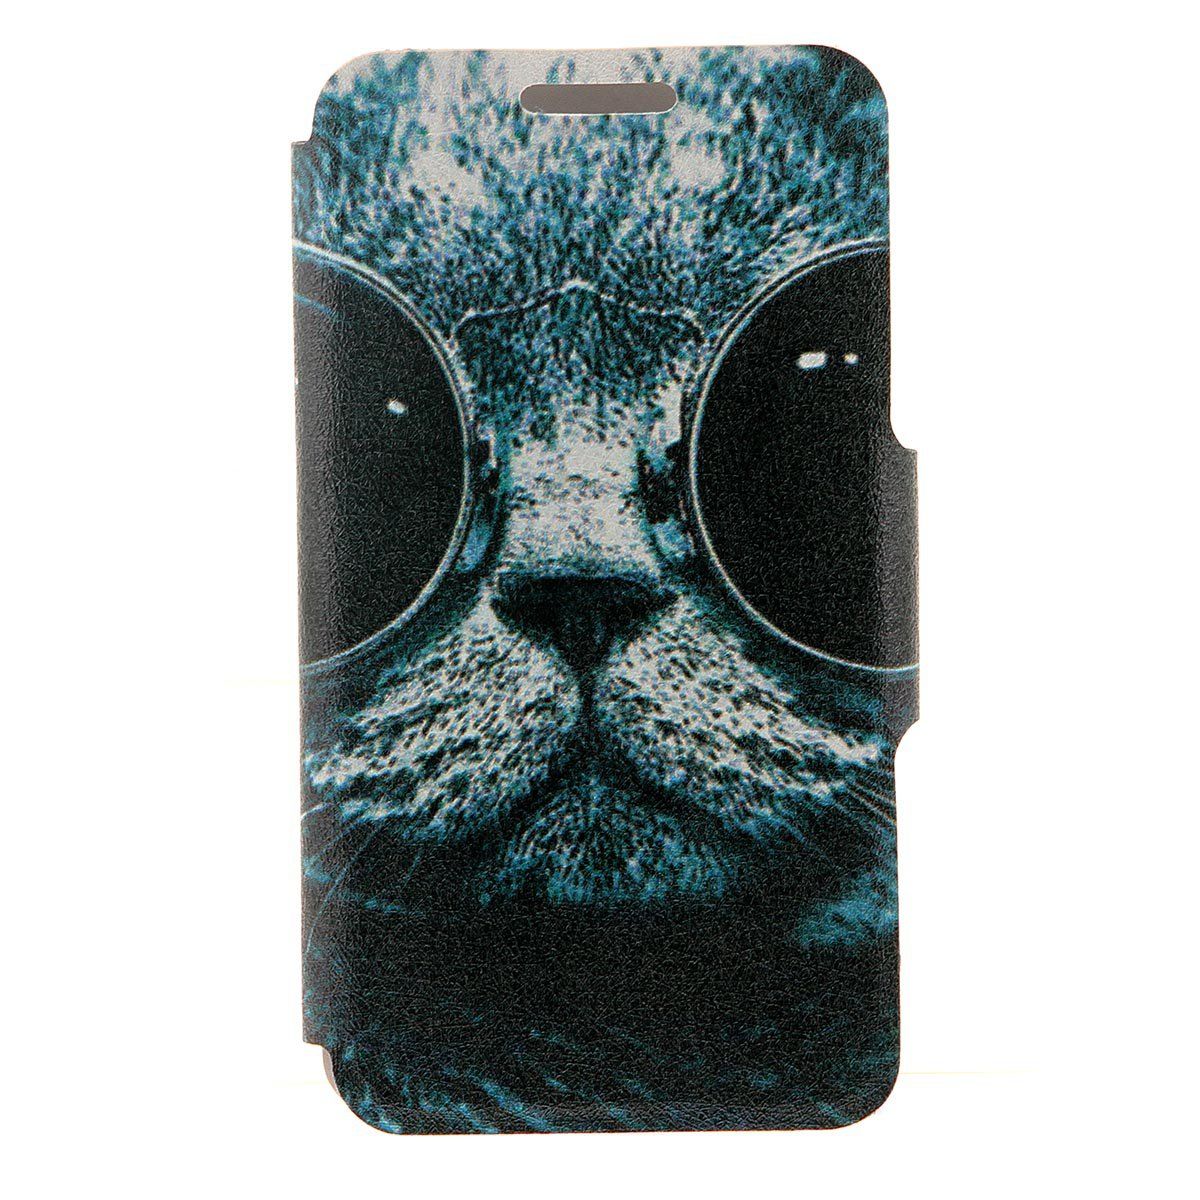 Kinston Sunglass Cat Pattern PU Leather Full Body Cover with Stand and Card Holder for iPhone 6 - 4.